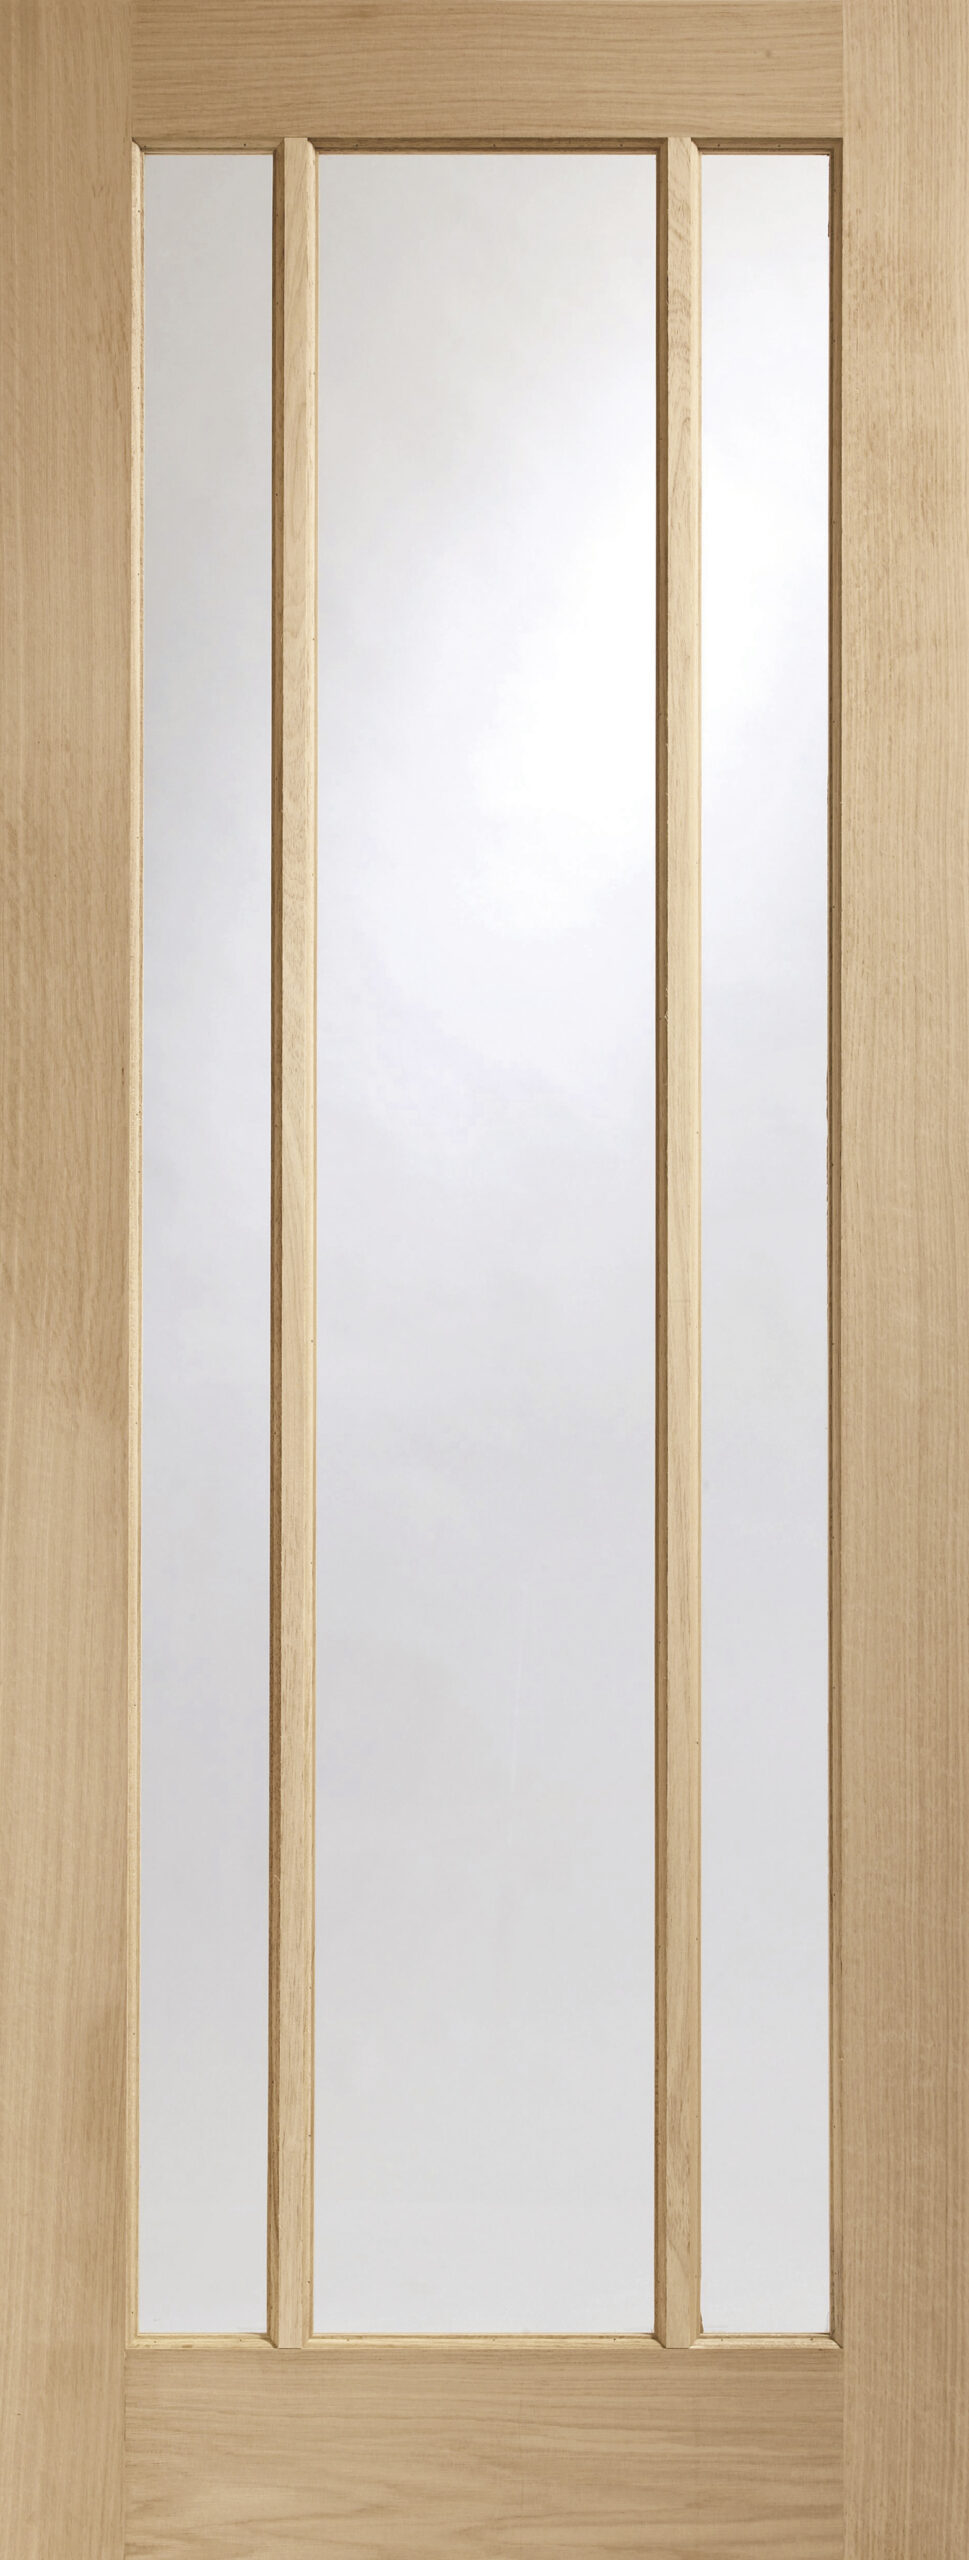 Worcester Internal Oak Door with Clear Glass – Clear Lacquer, 2040 x 826 x 40 mm